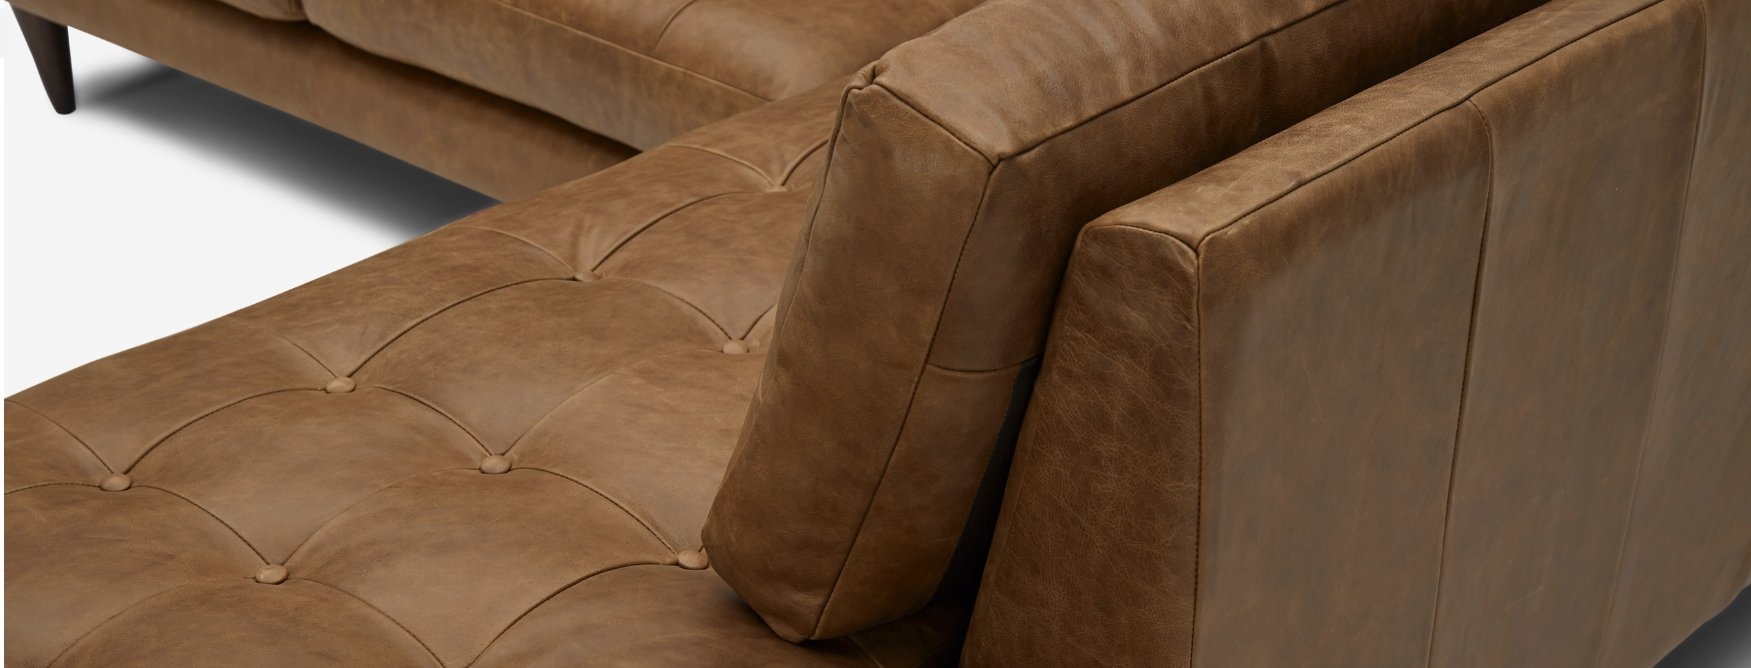 Eliot Leather Sectional with Bumper - Right Arm Orientation - in Santiago Ale with Mocha Wood Stain - Image 6